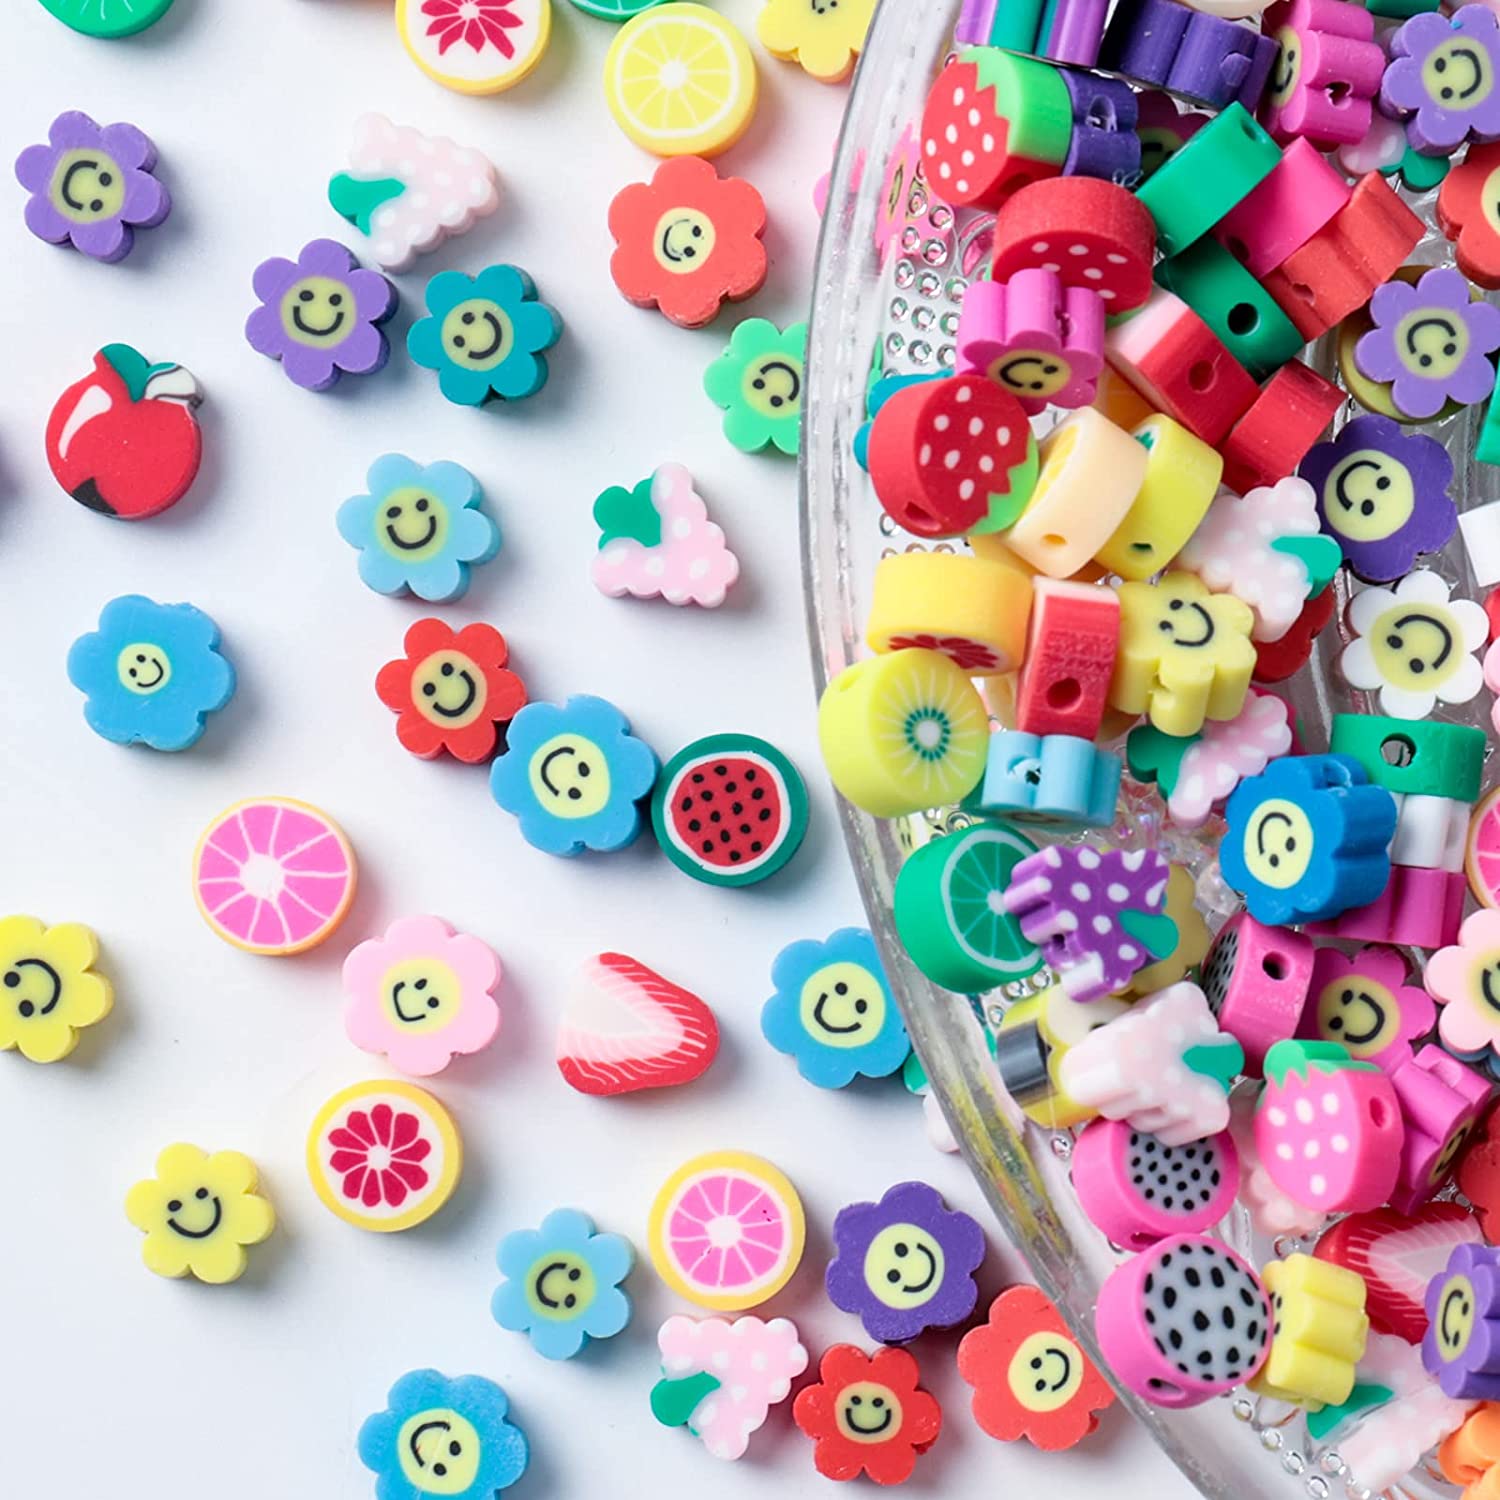 200pcs Mixed Fruit Spacer Beads Smile Face Beads Color Polymer Clay Beads,  for DIY Jewelry Bracelet Earring Necklace Craft Making Supplies